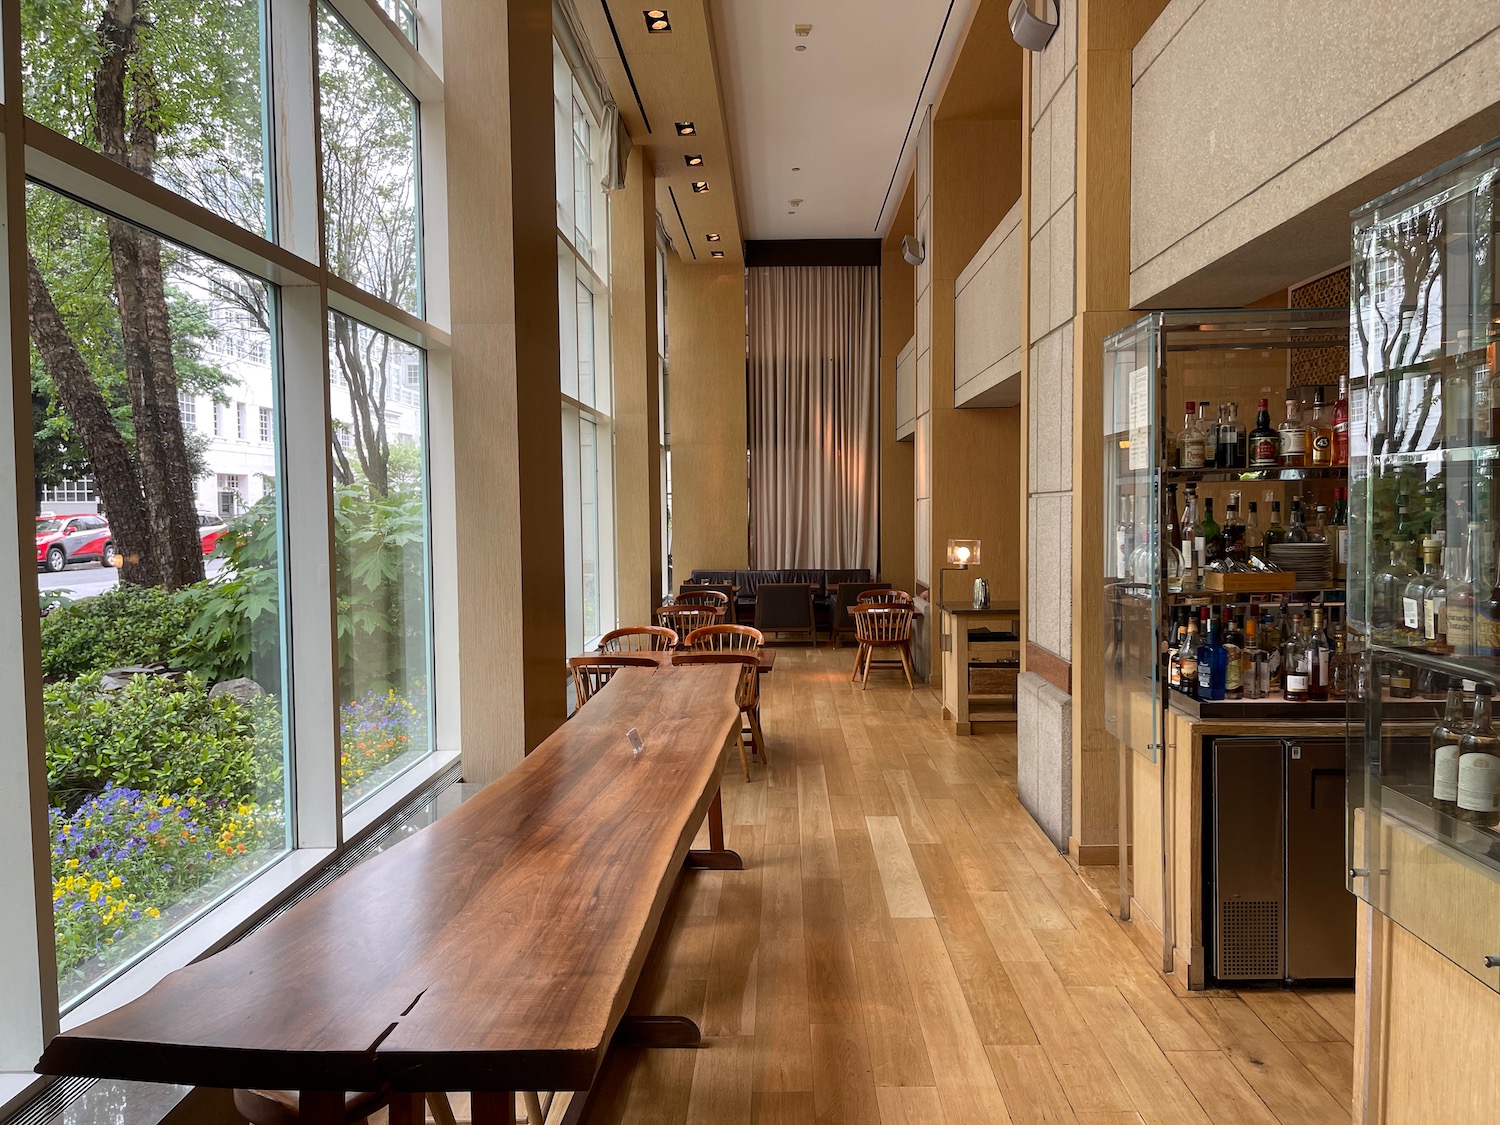 a long wooden table in a room with a glass case and a bar